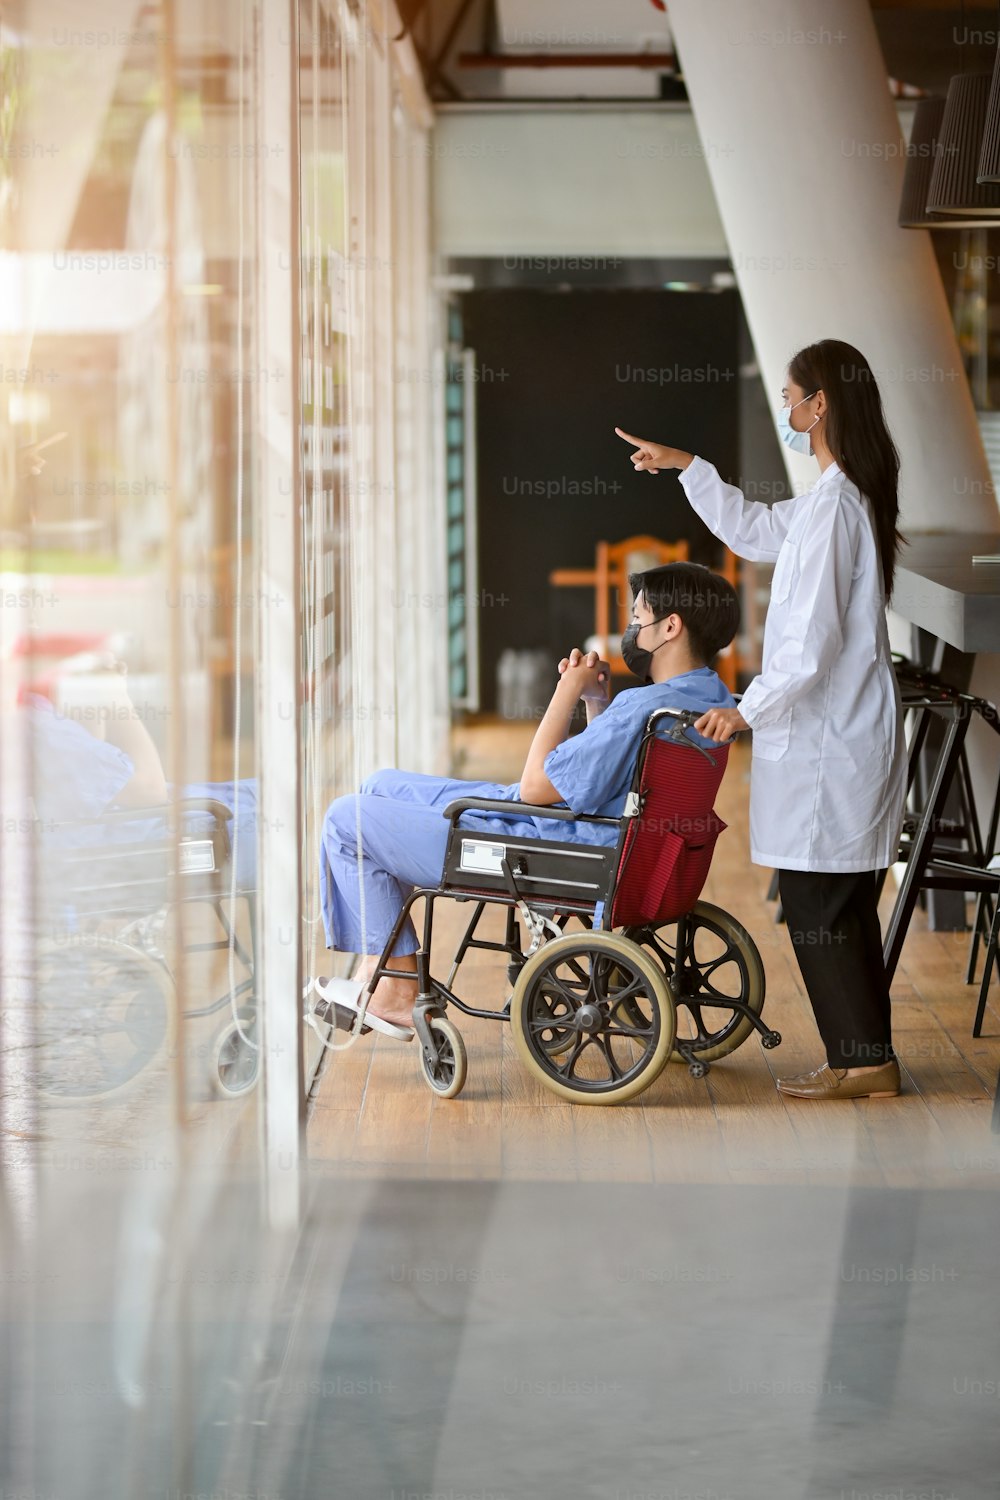 A young male patient in a wheelchair sits in a hospital corridor against a large window, accompanied by a female doctor.